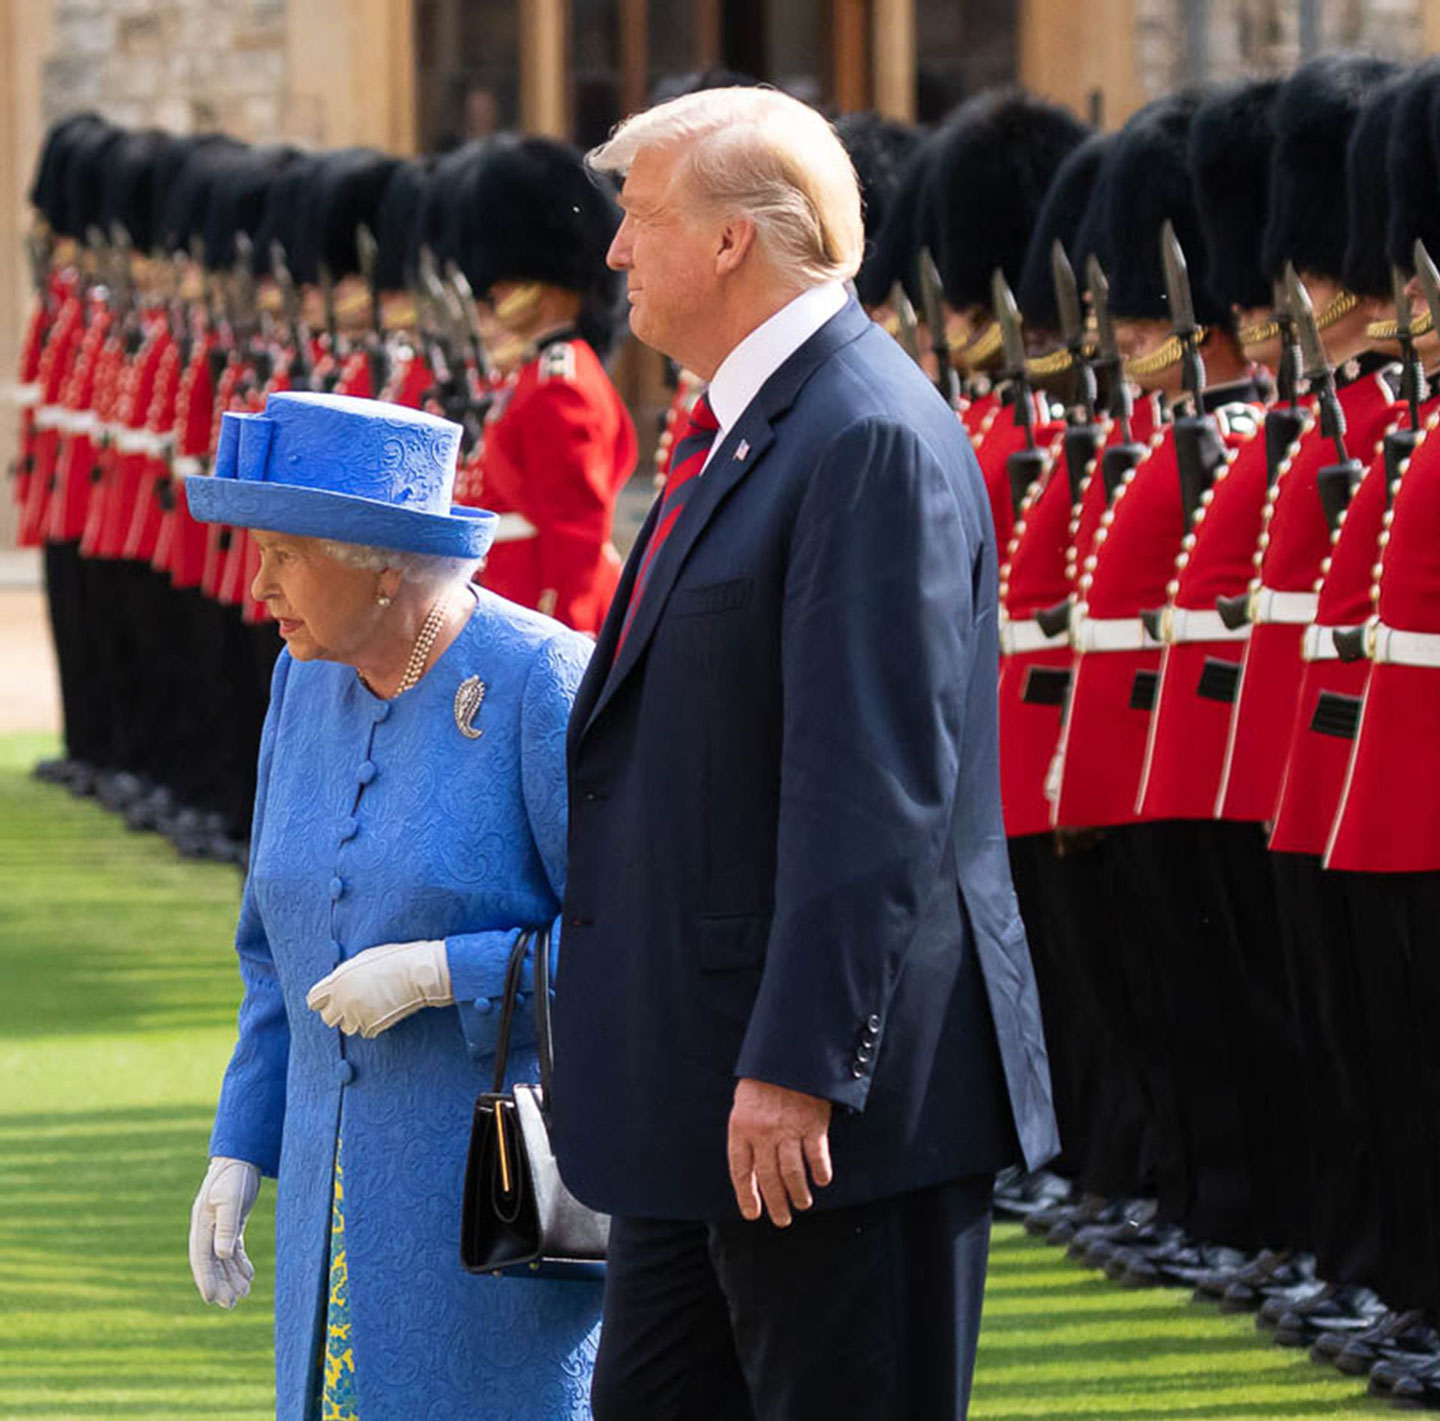 During the former US president’s visit in 2018, the Queen wore a brooch representing a humble flower, a gift from Trump’s rivals, the Obamas